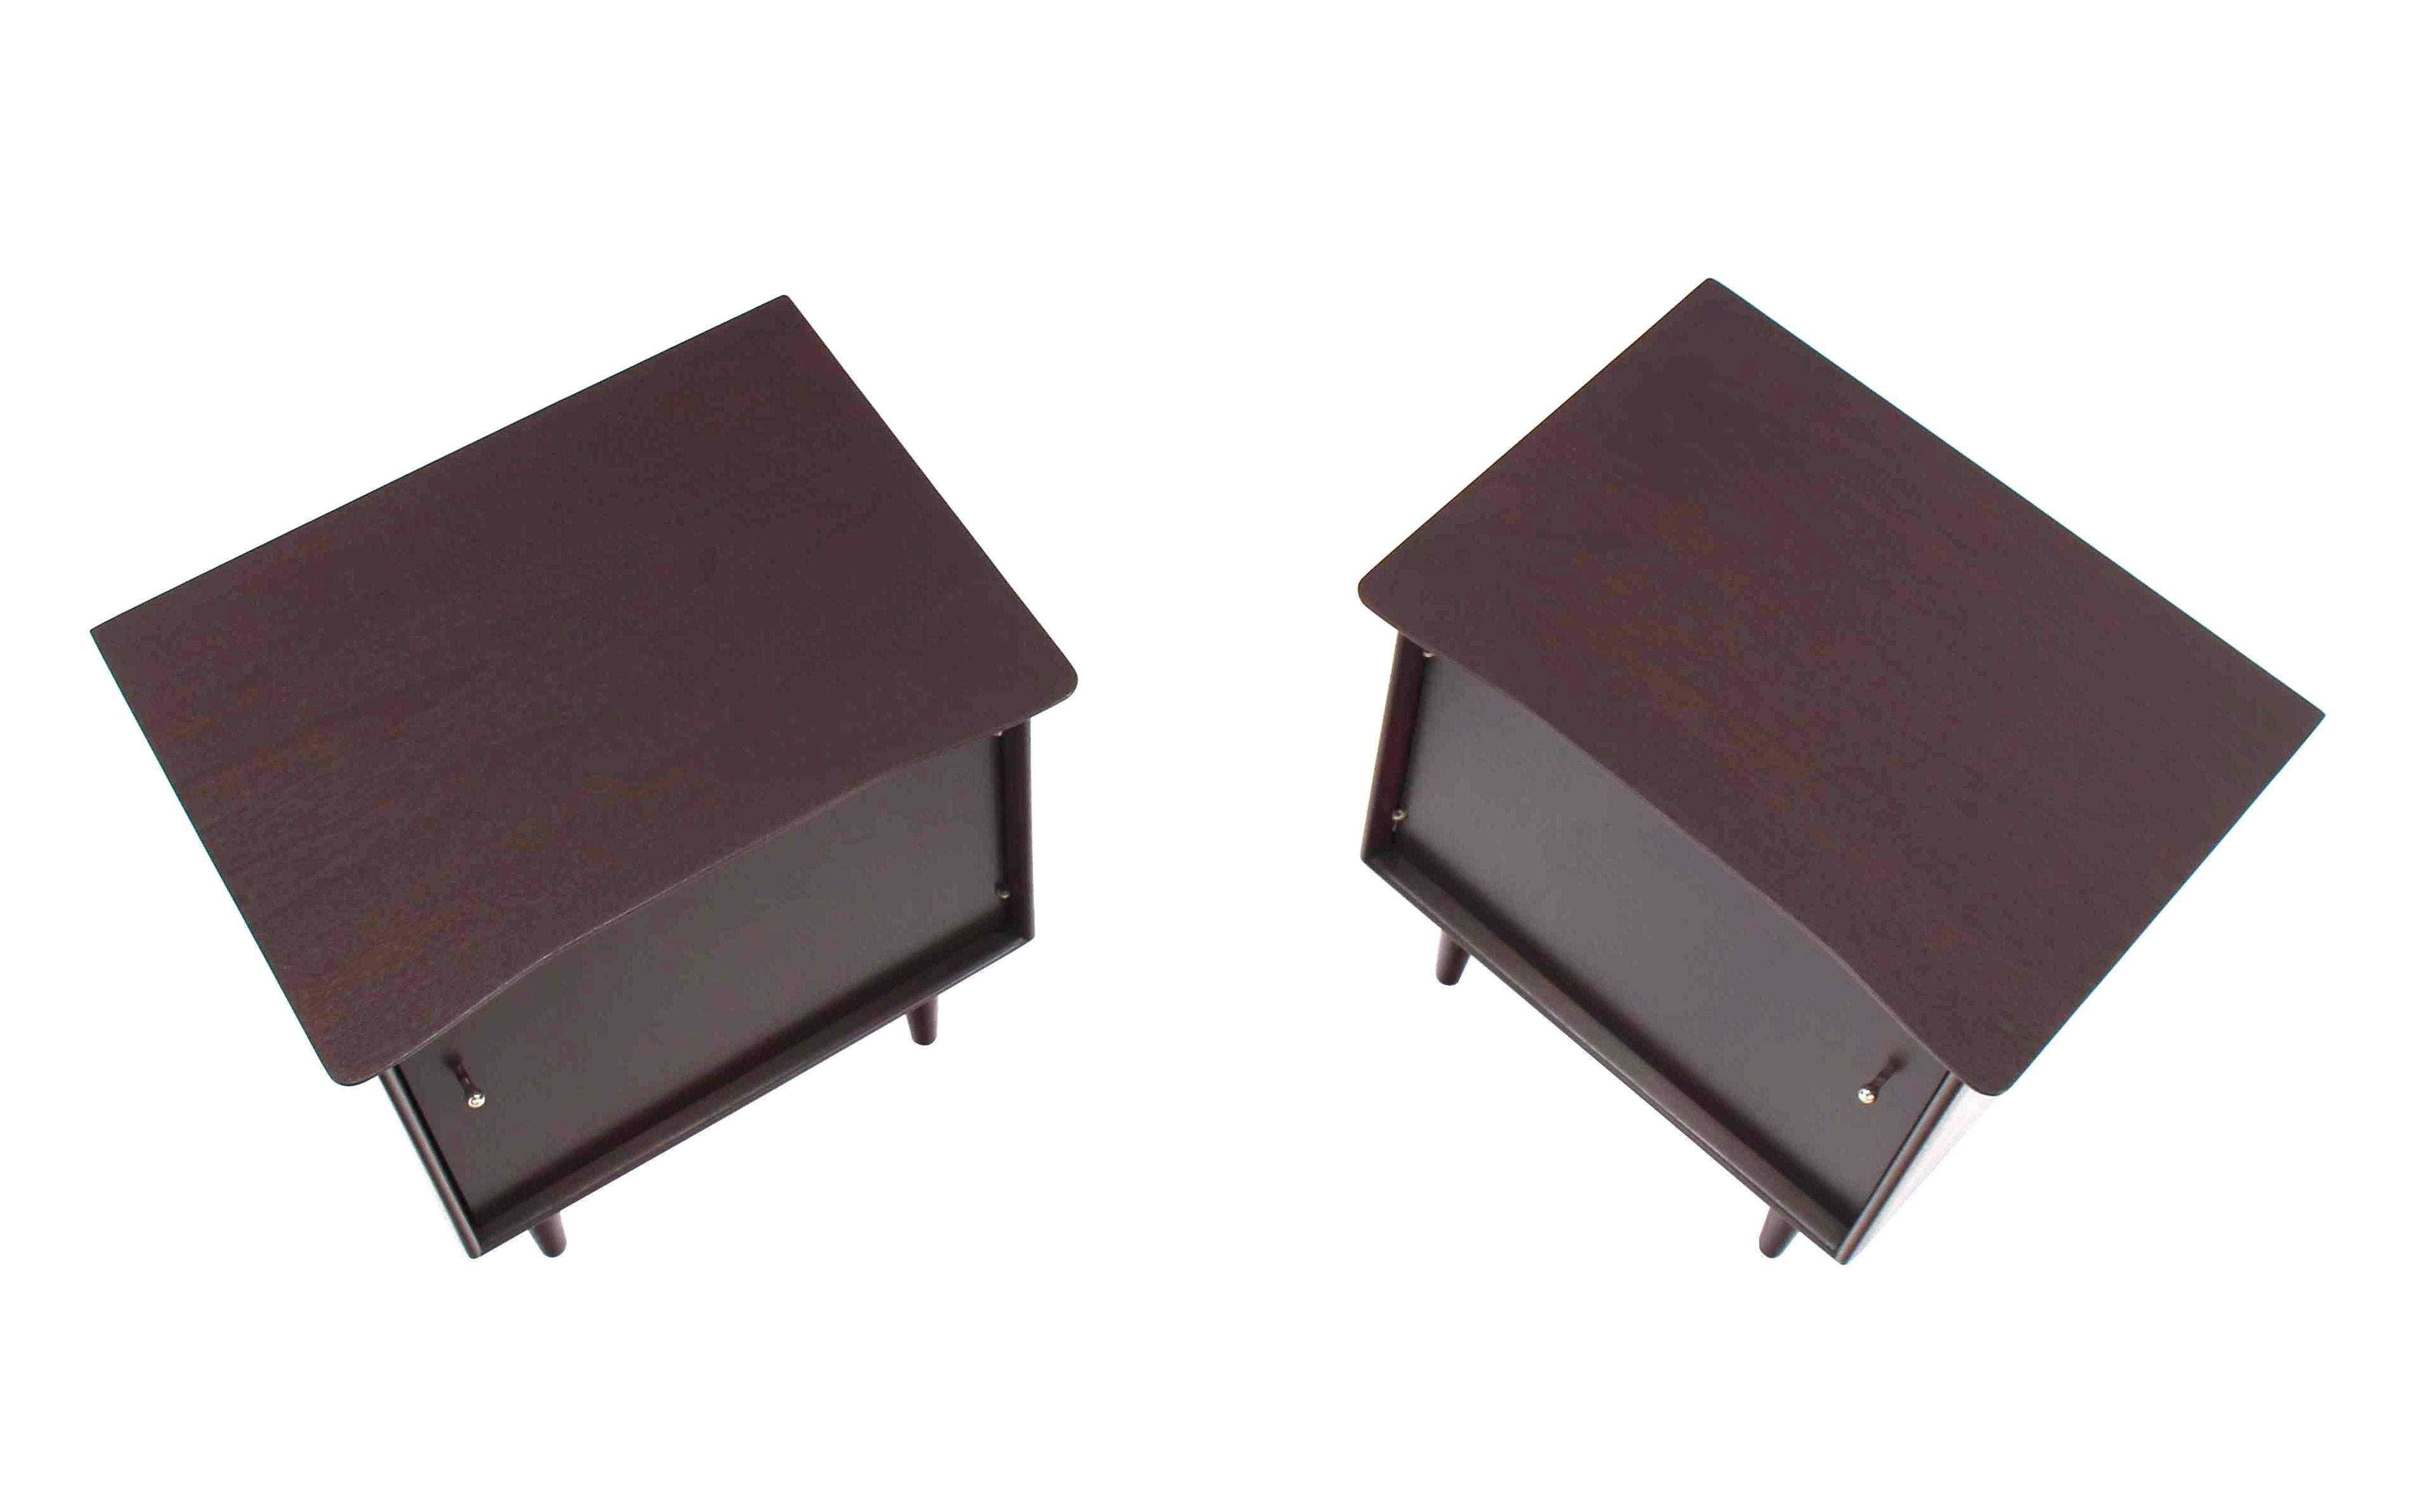 Pair of Mid-Century Modern end tables or nightstands. Dark chocolate near ebony low gloss finish.